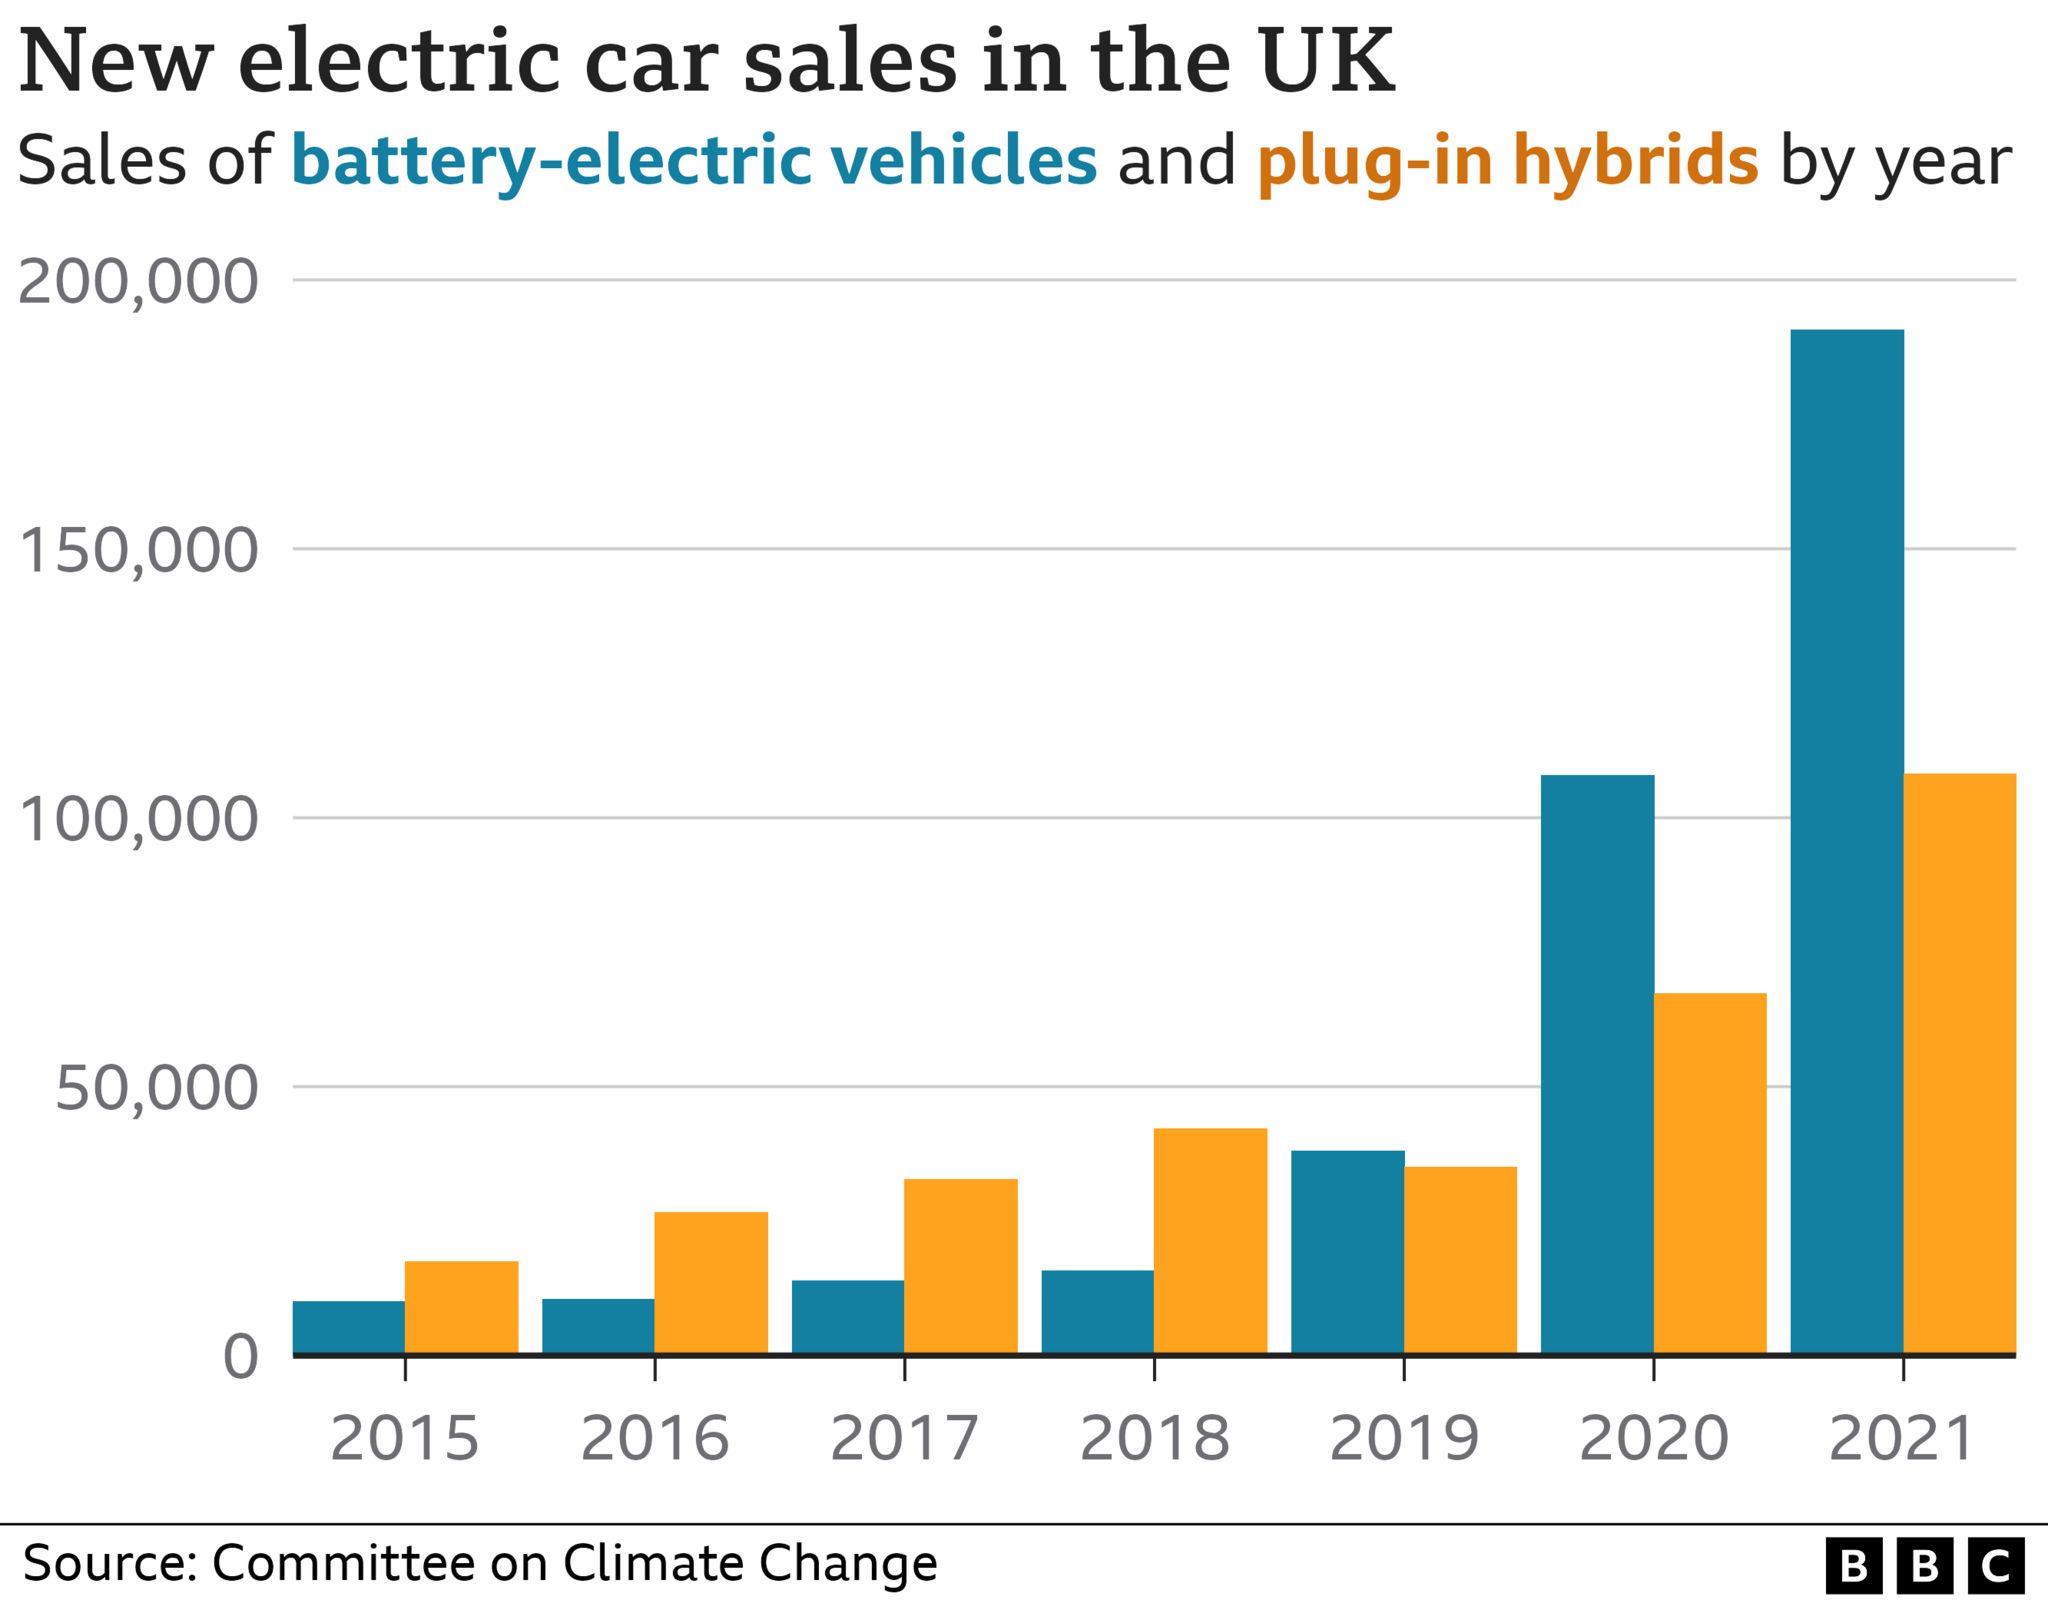 Chart showing new electric car sales